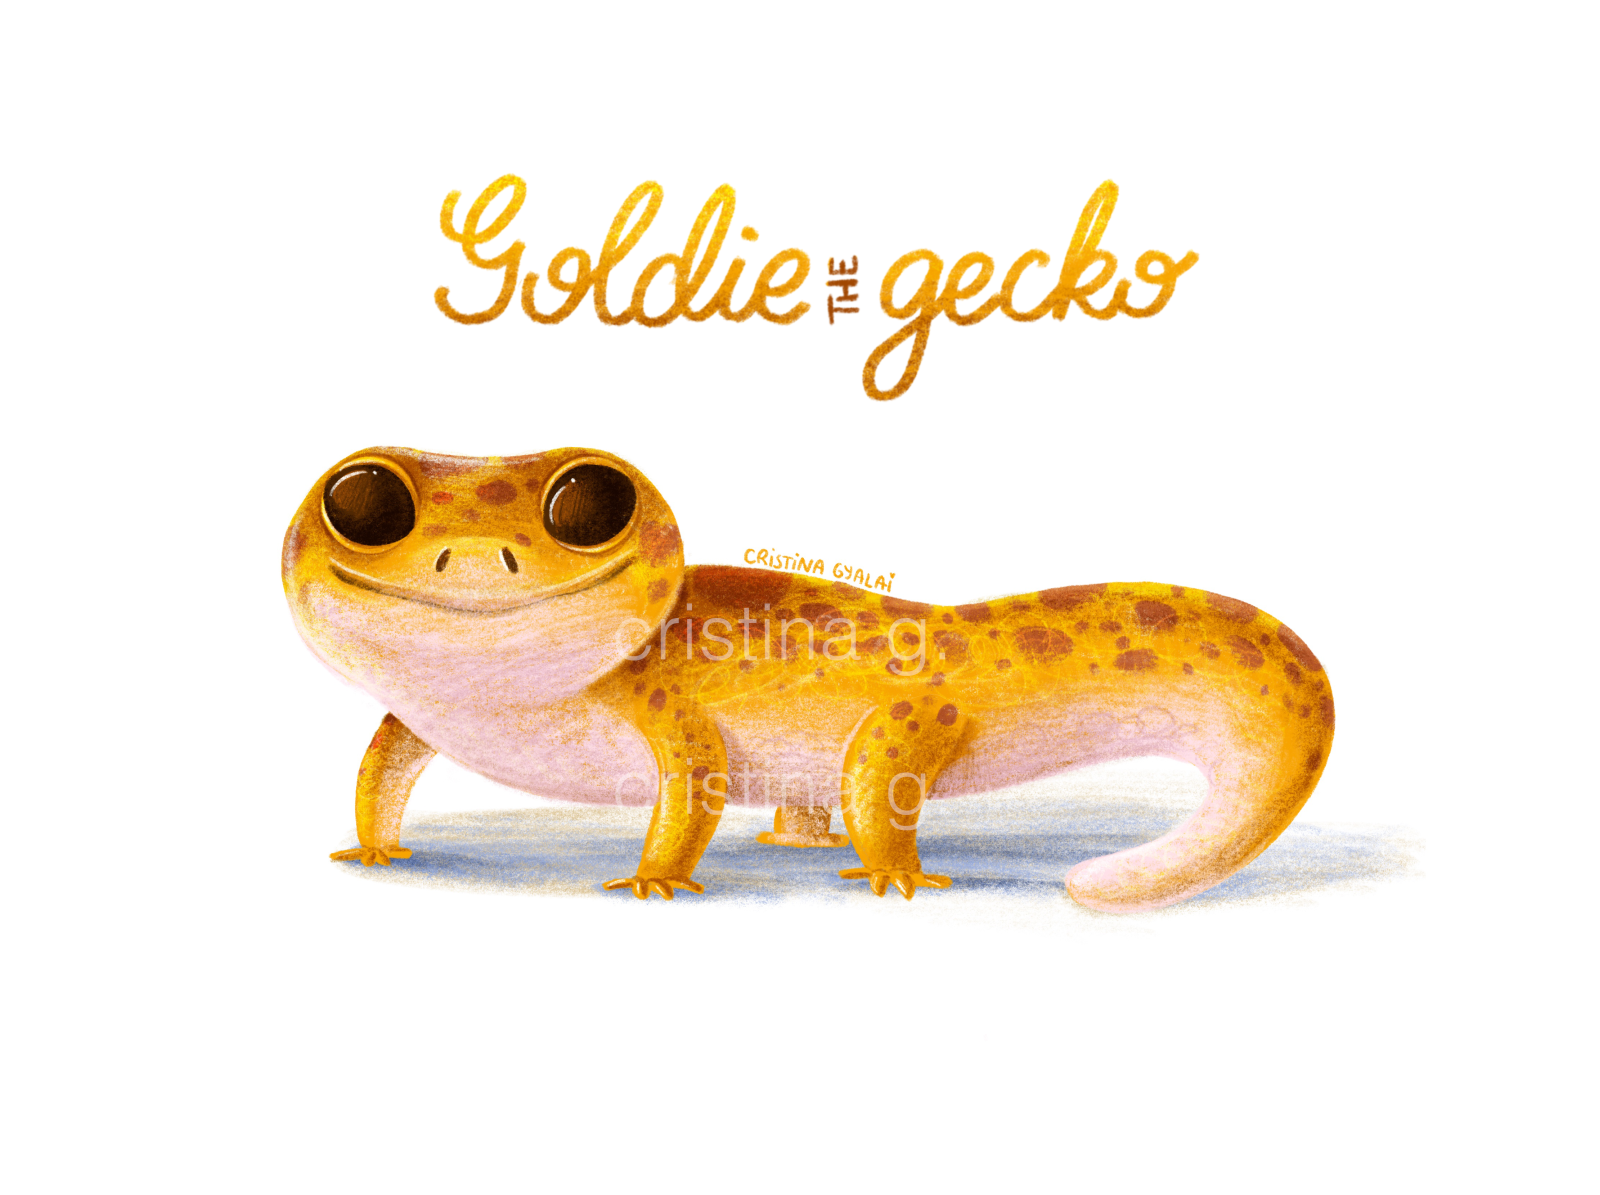 Goldie the gecko by Cristina G. on Dribbble